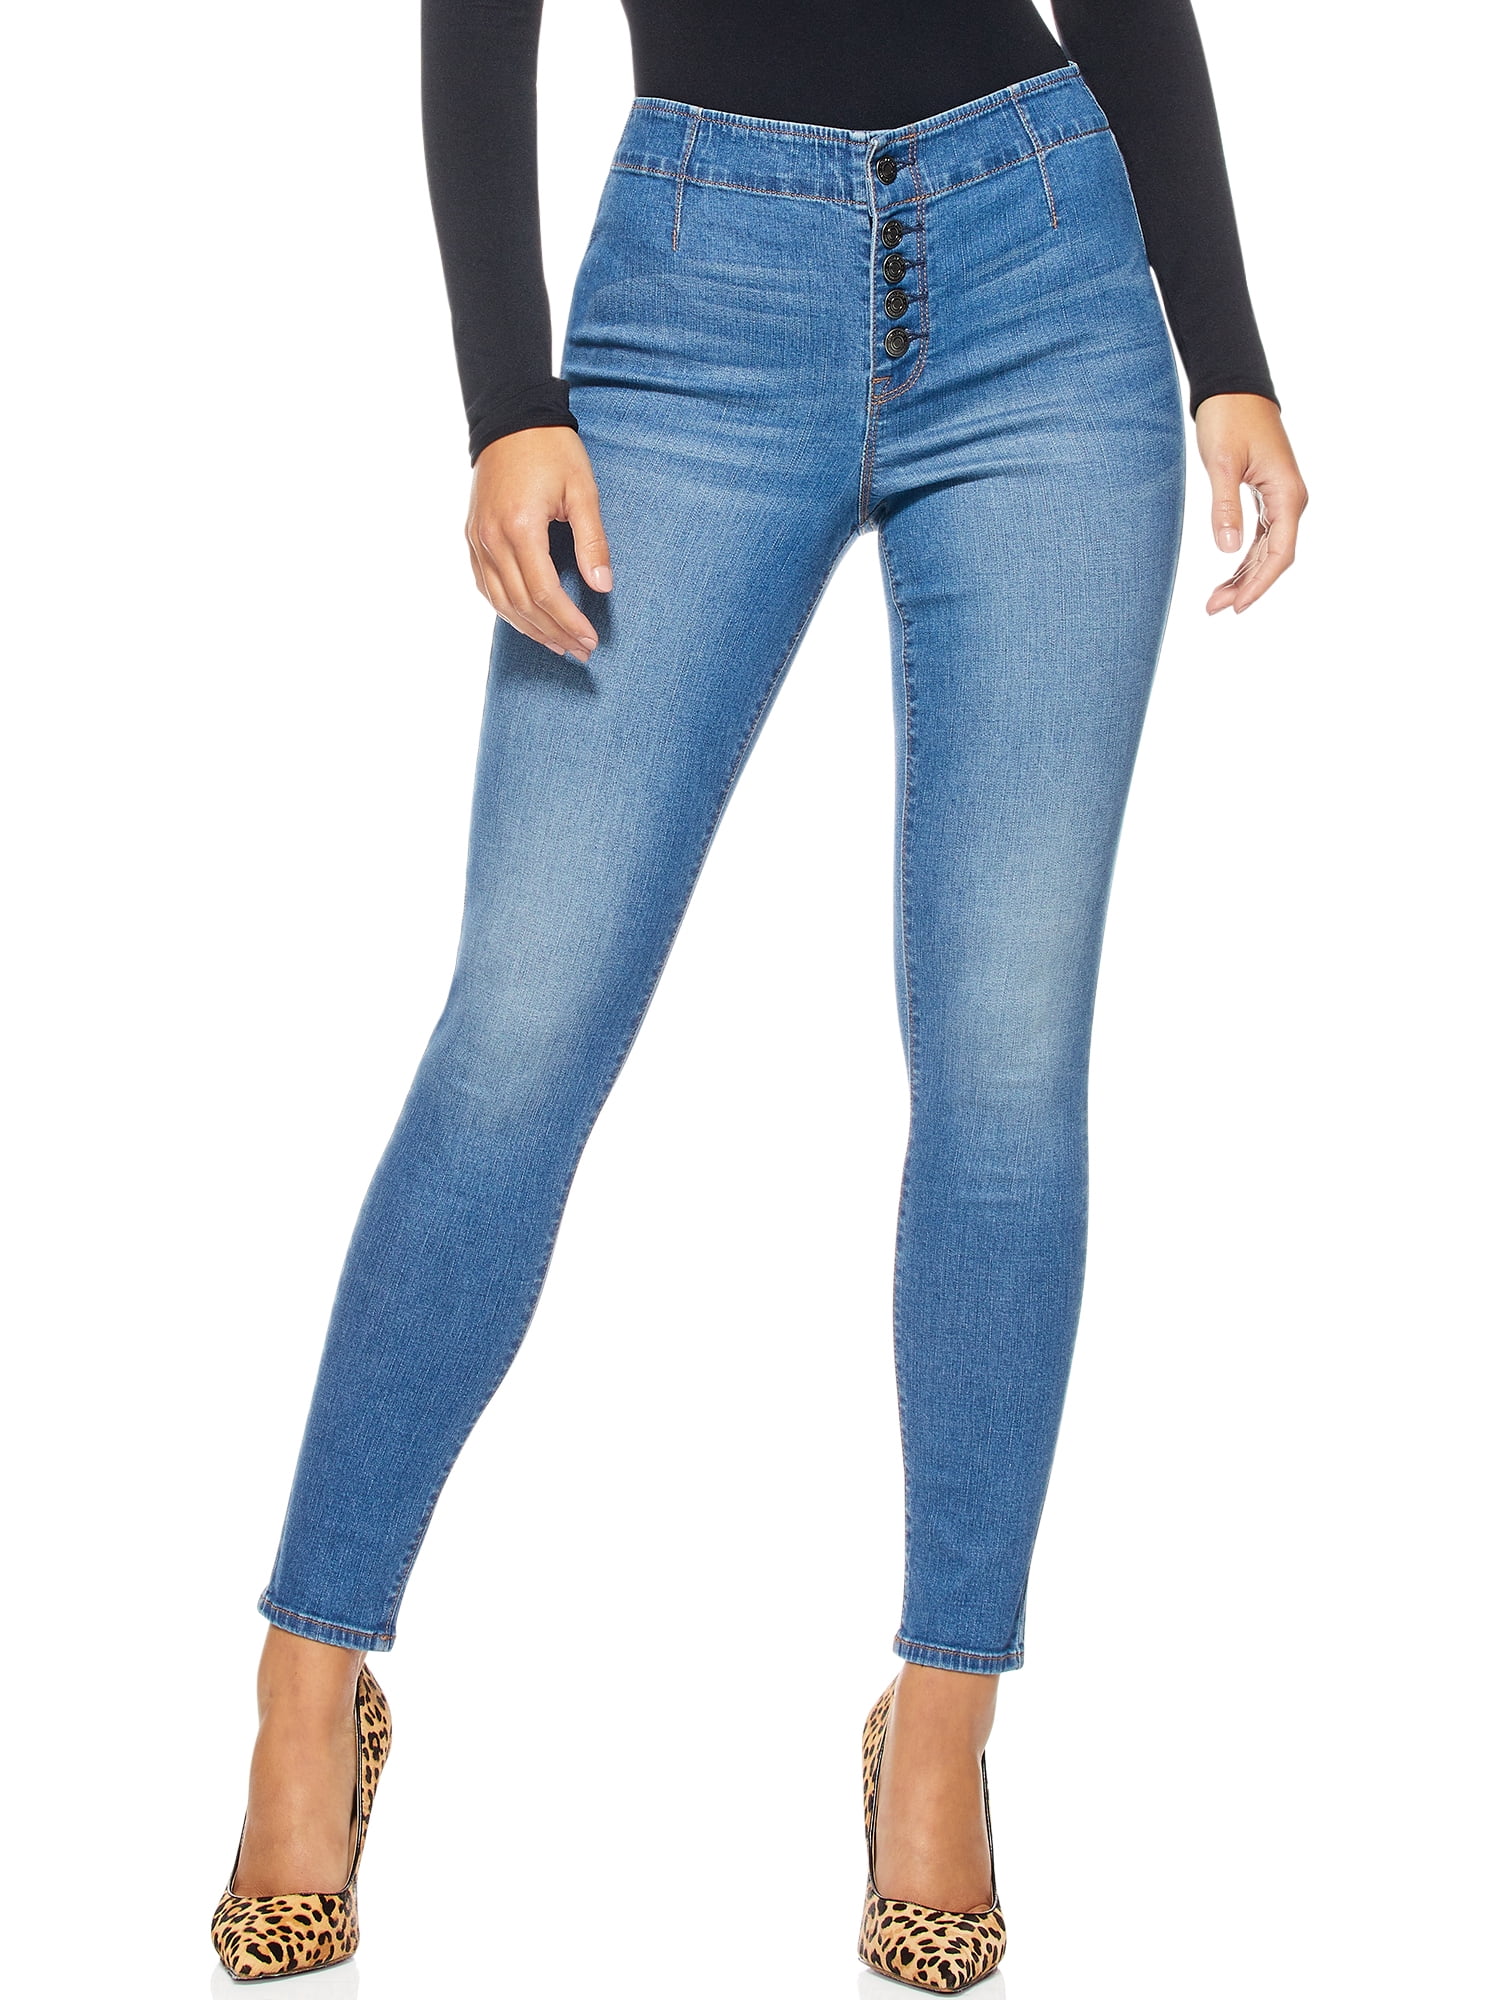 Emotion refugees superstition Sofia Jeans by Sofia Vergara Women's Rosa Curvy Ripped High-Rise Ankle Jeans  - Walmart.com